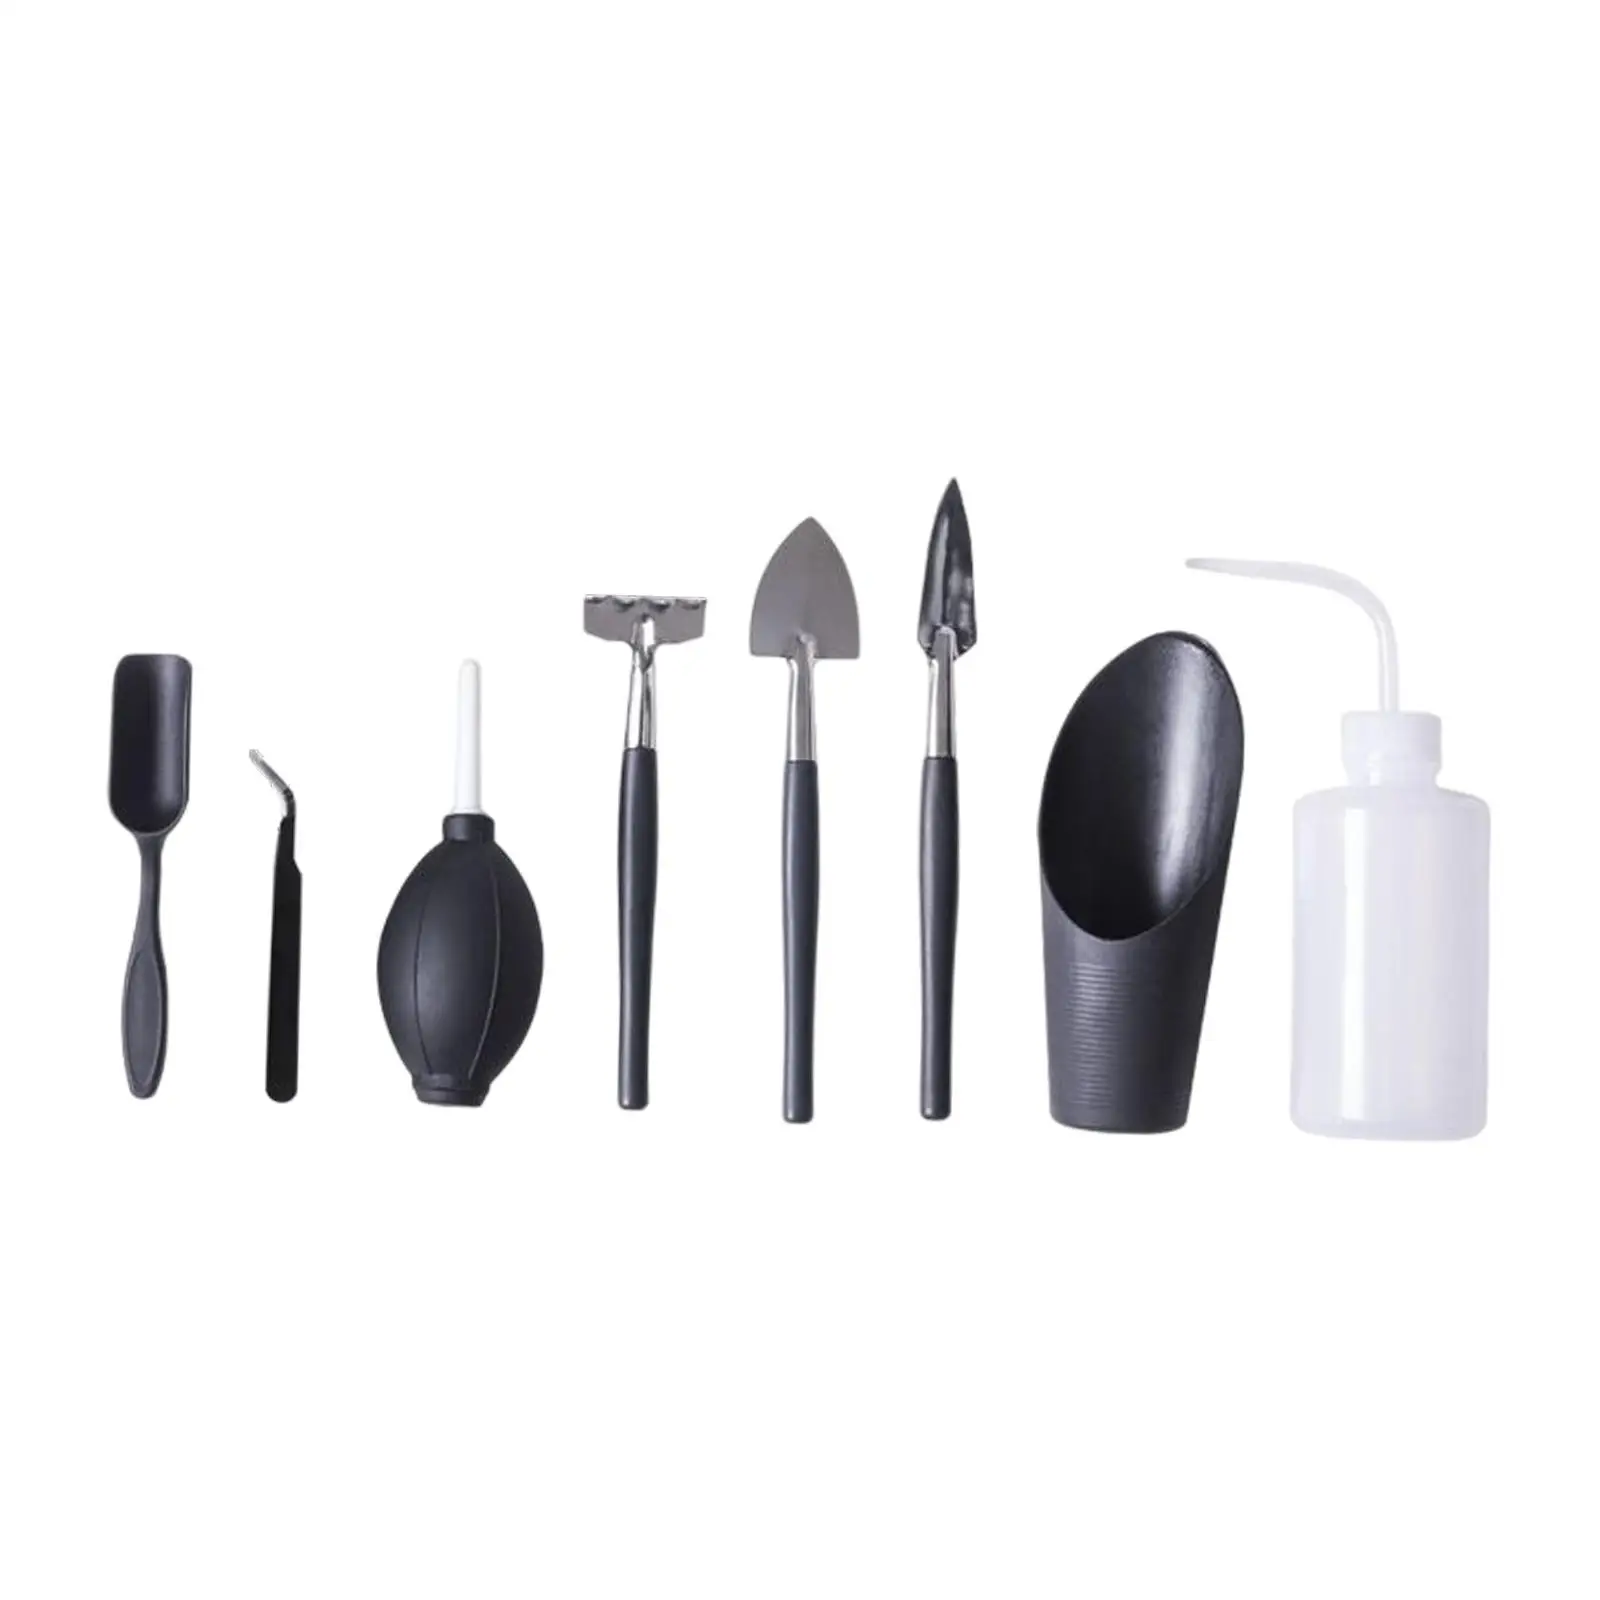  Transplanting Tools 8 Pieces Easy to Wash Simple to Use Accessories Stainless Steel, PP Materials Durable Lightweight